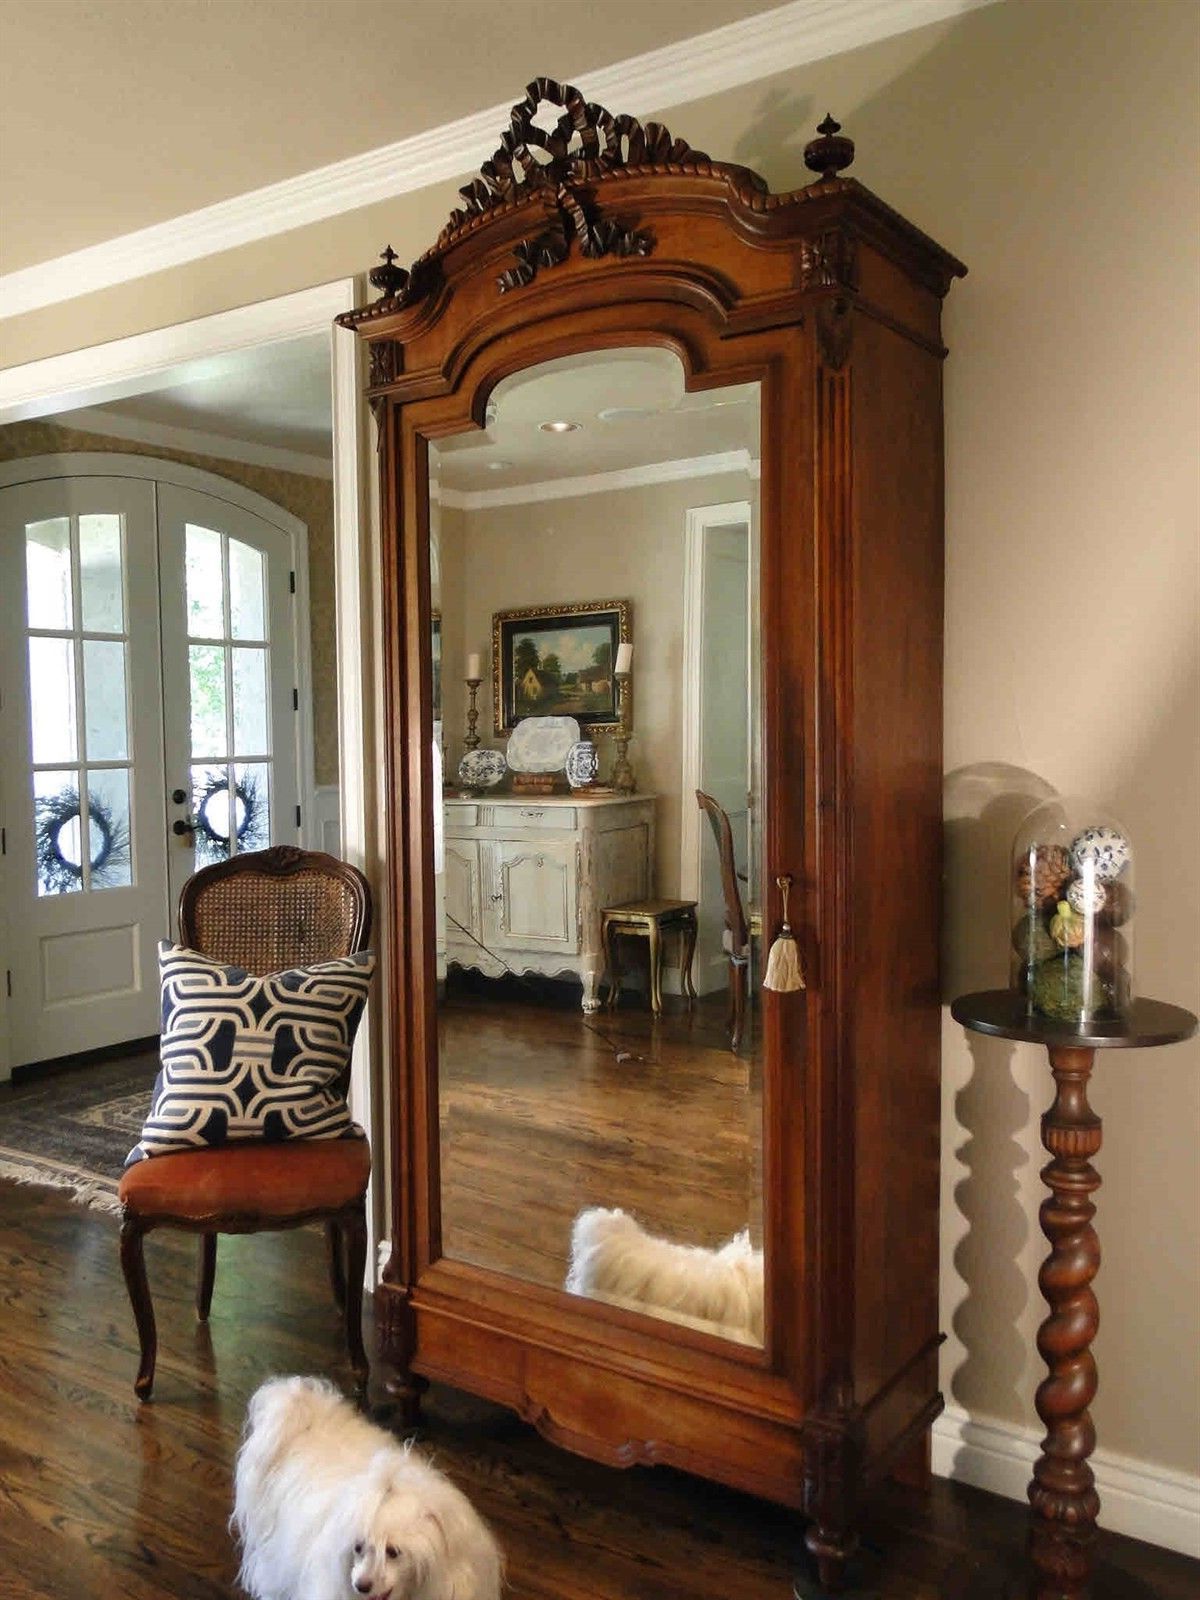 Antique French Armoire Wardrobe Bow Carving Mirrored Door Key Fitted Inside Throughout French Style Armoires Wardrobes (Gallery 13 of 20)